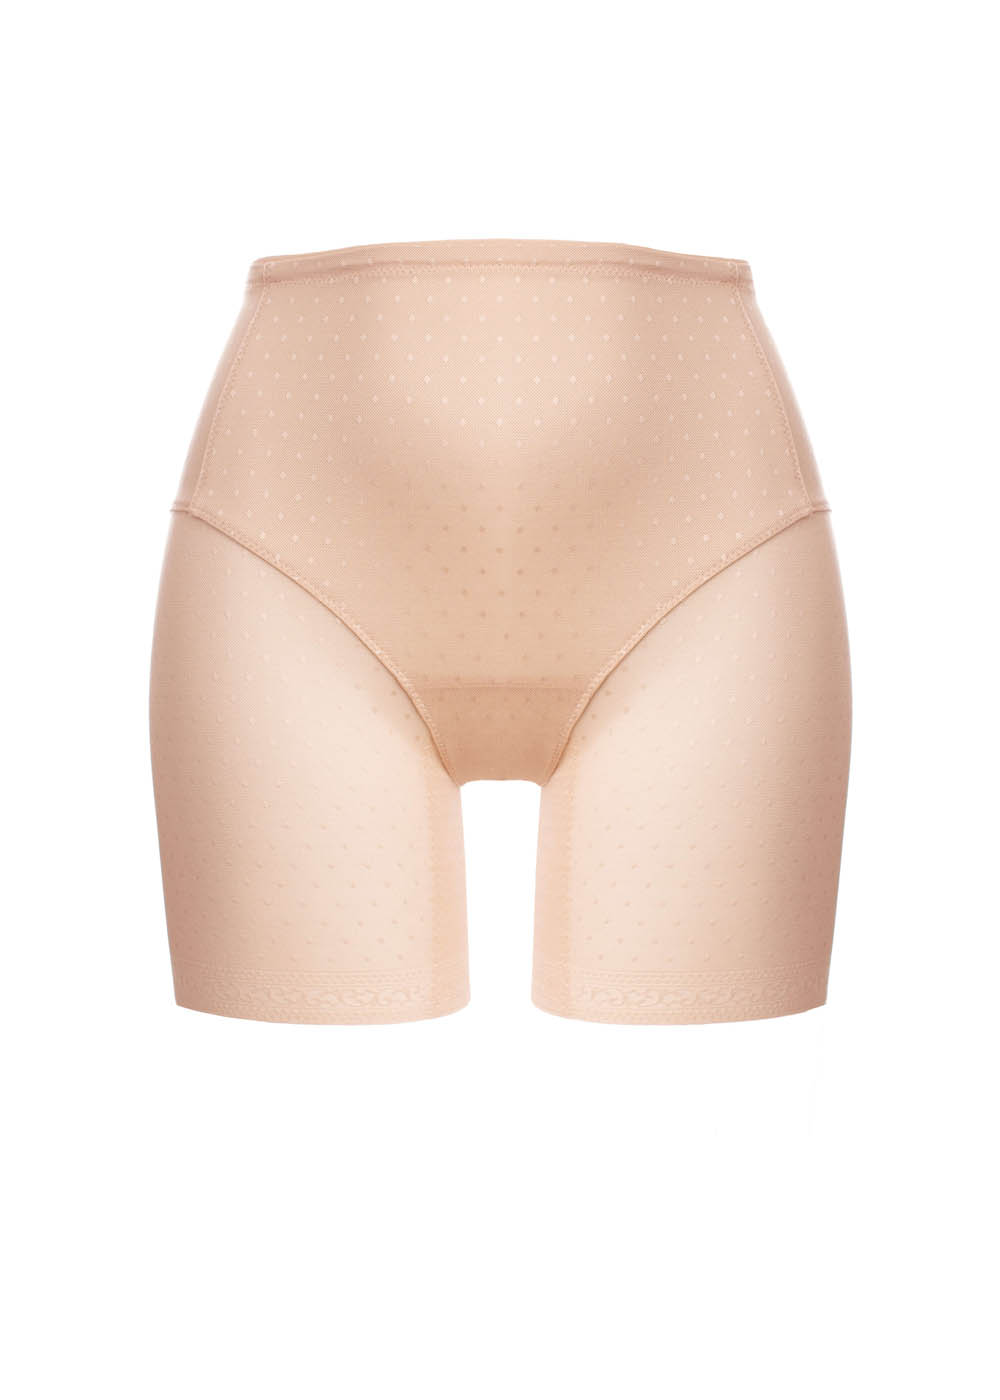 Panty Gainant Ulla Dessous Biscuit